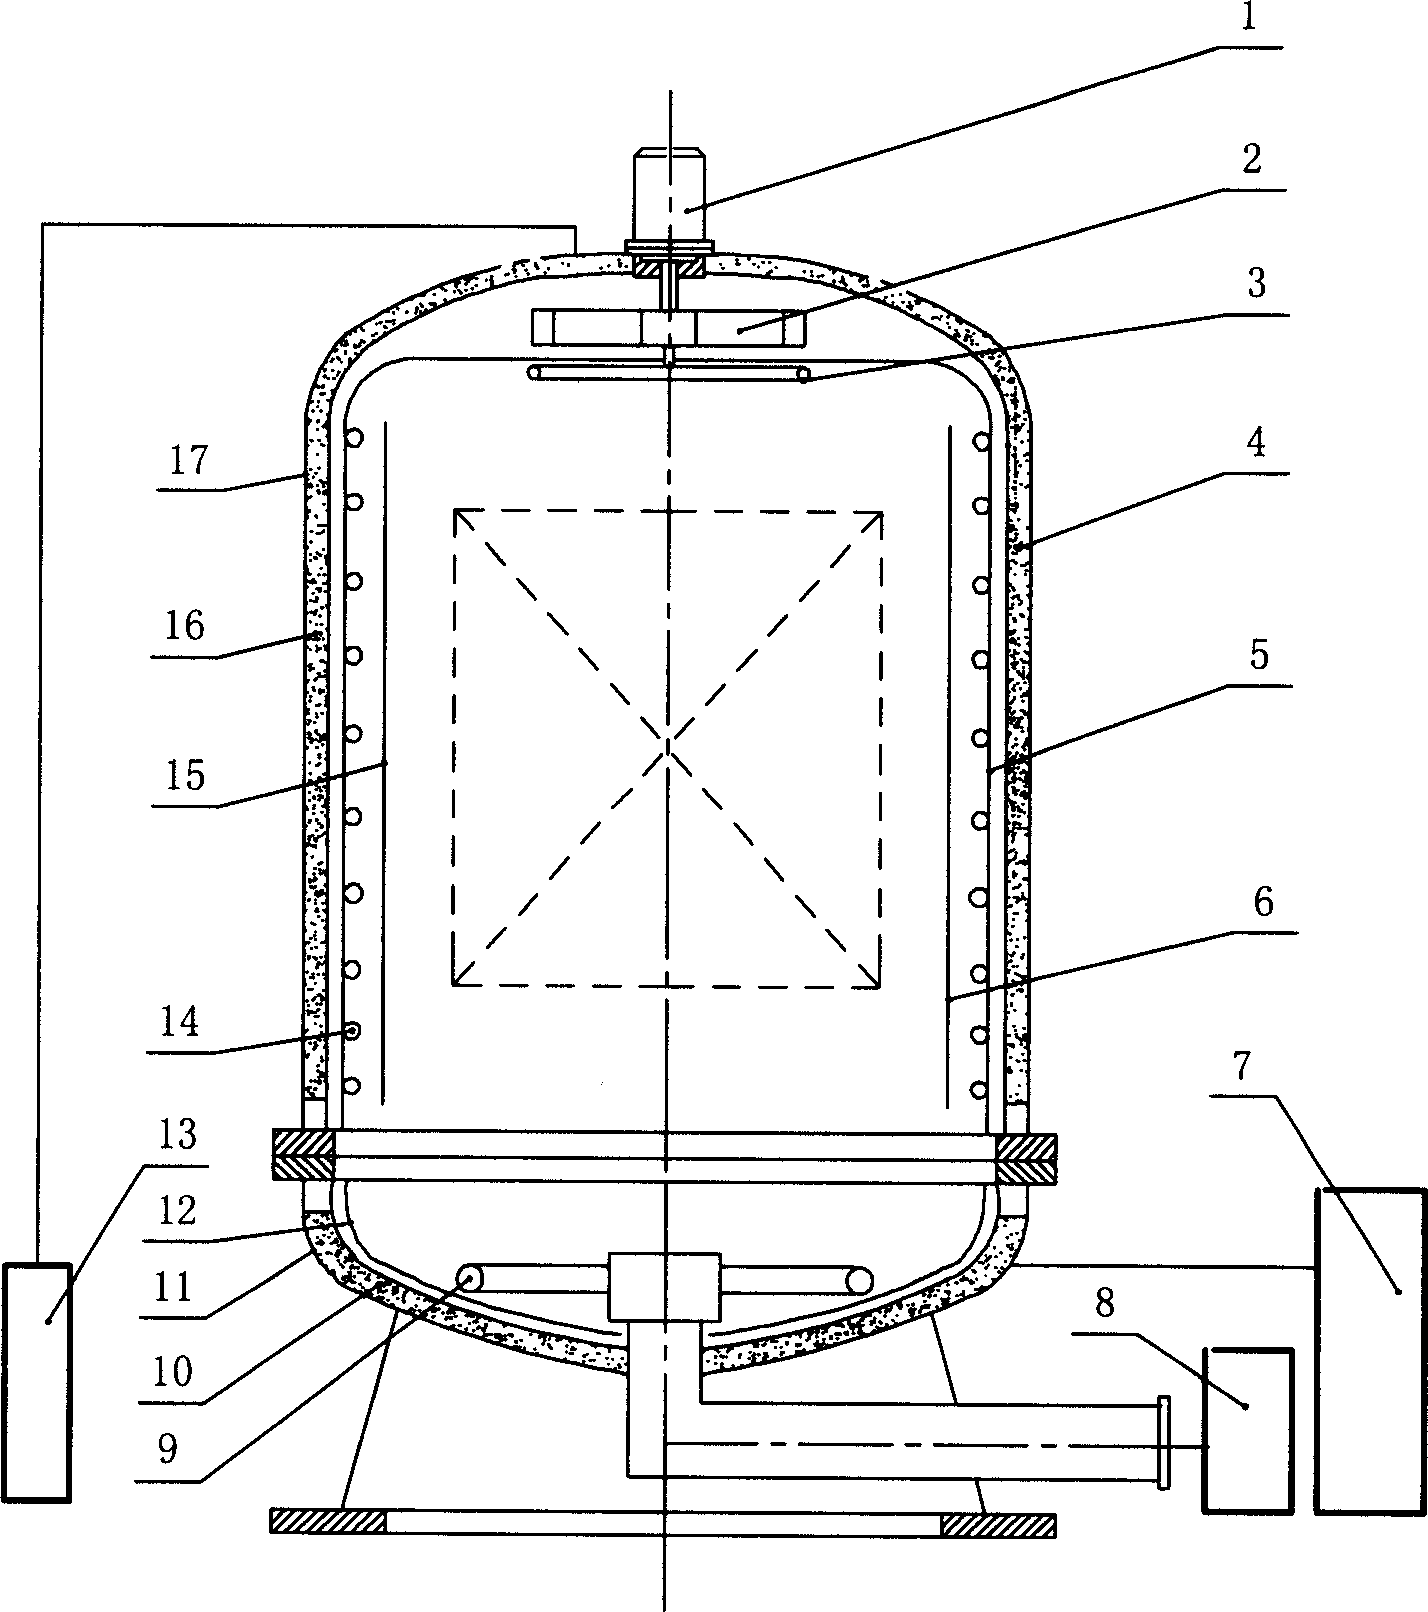 Vacuum high pressure pulse discharge catalyzed chemical heat treatment apparatus and method